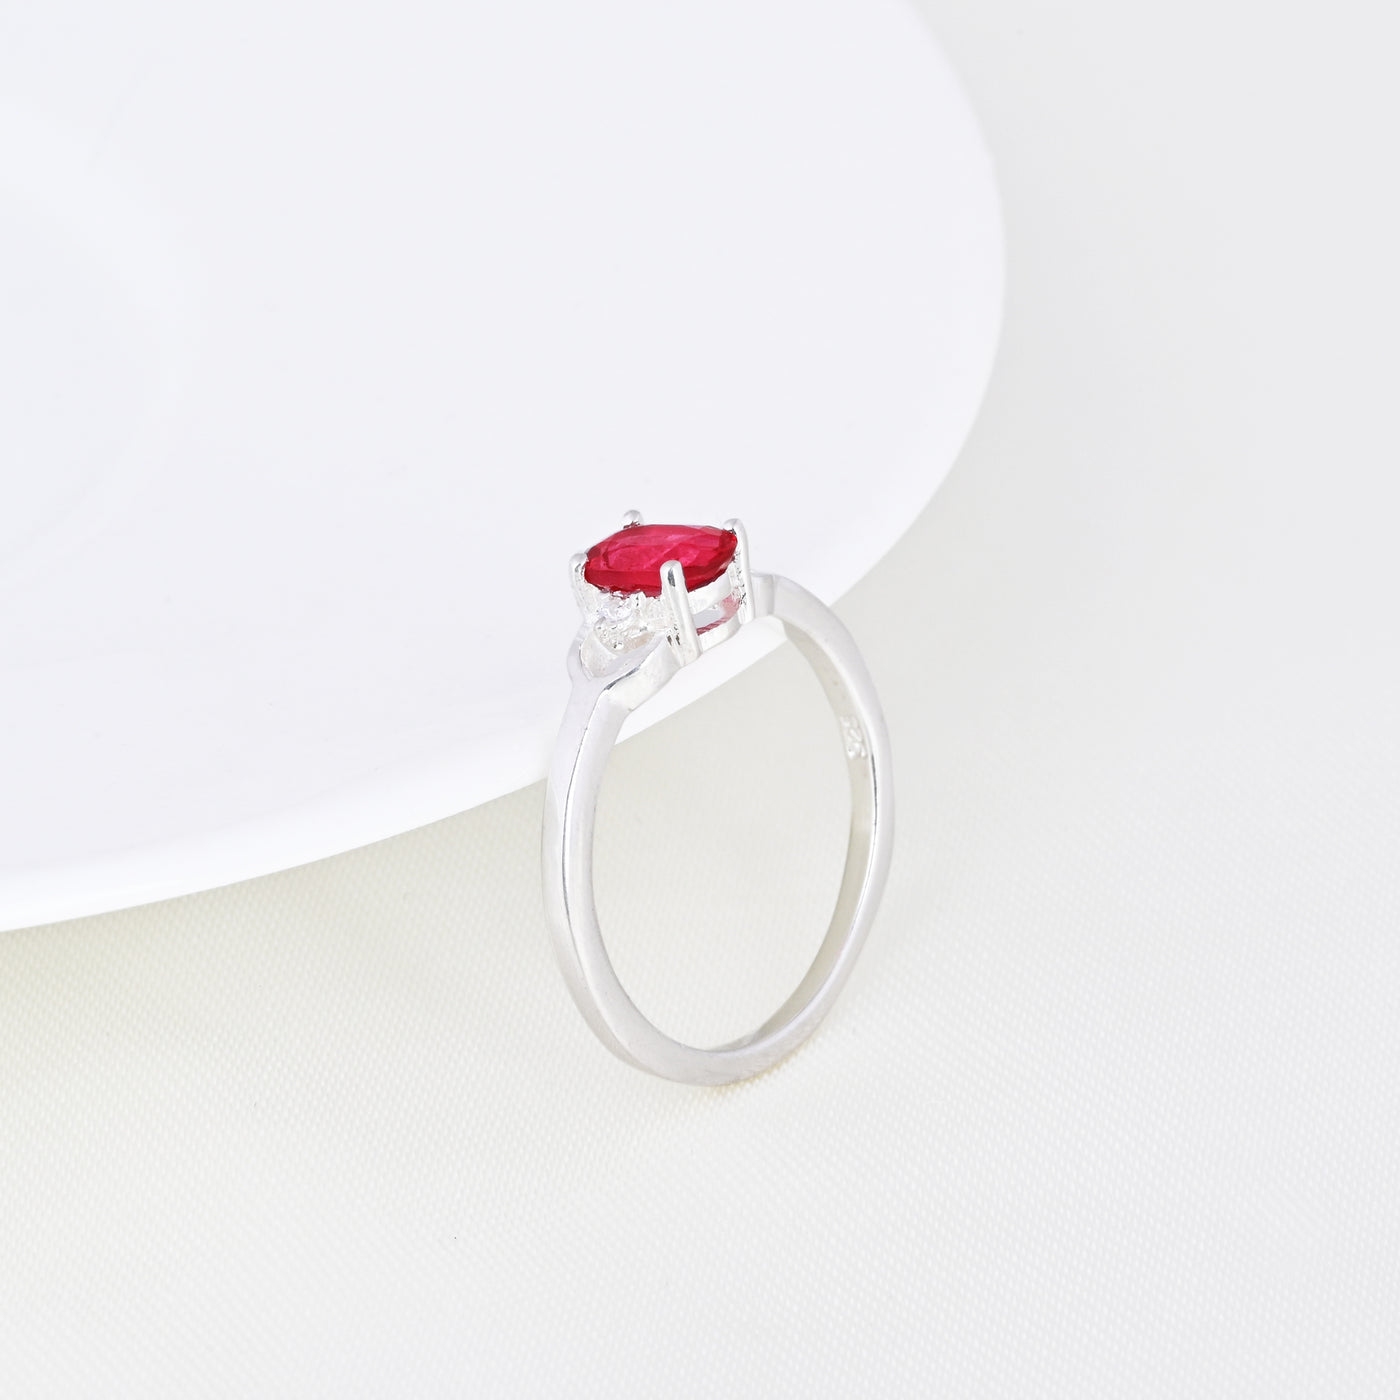 Natural Oval Ruby Gemstone Sterling Silver Cocktail Ring